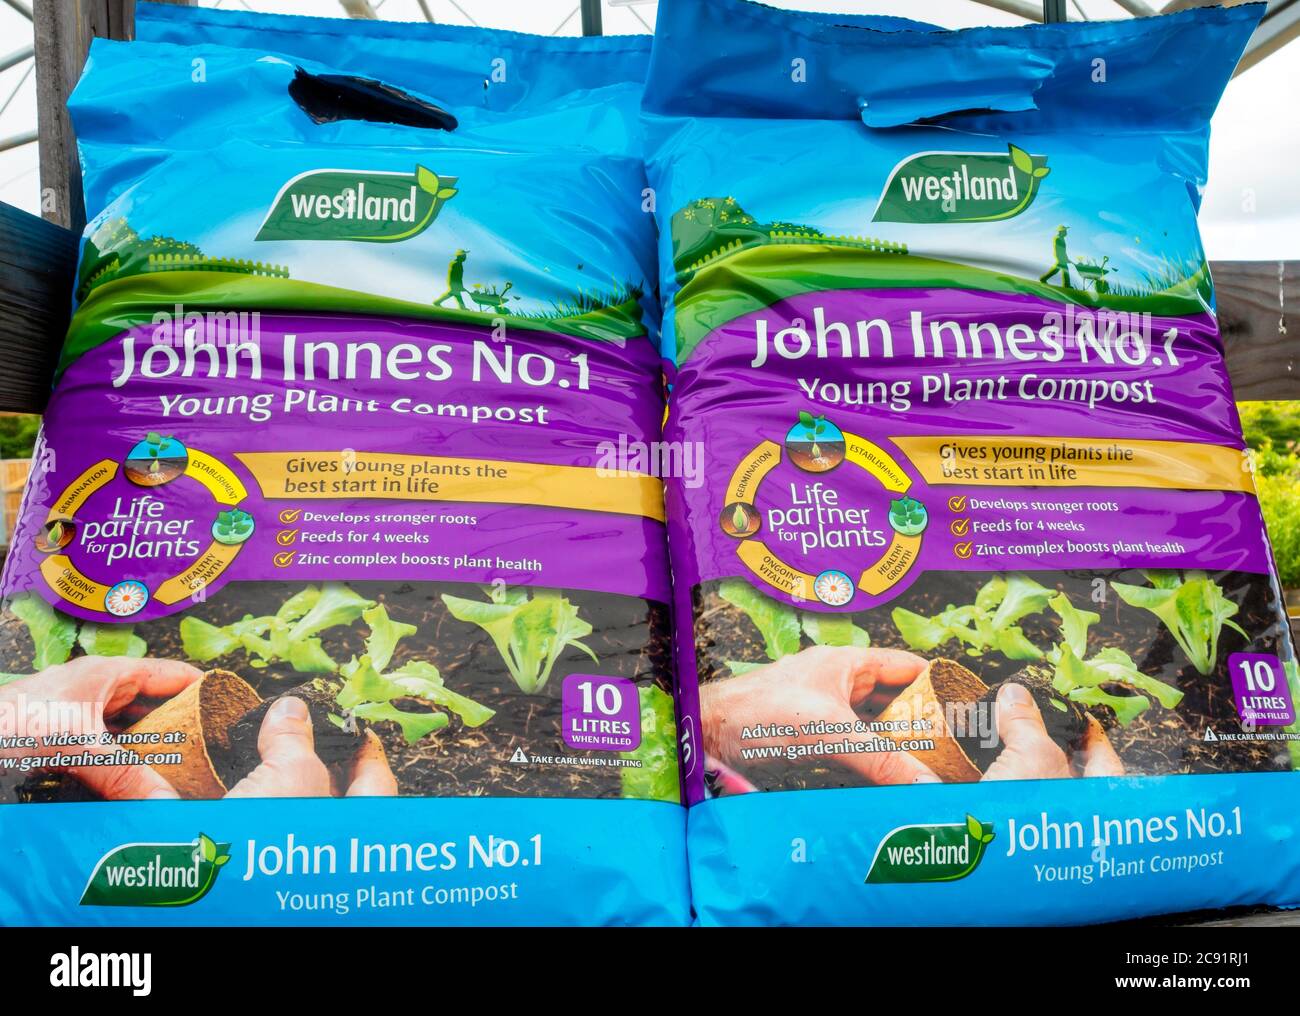 Two bags of John Innes No. 1 Young Plant Compost in a garden centre small bags easy to carry Stock Photo